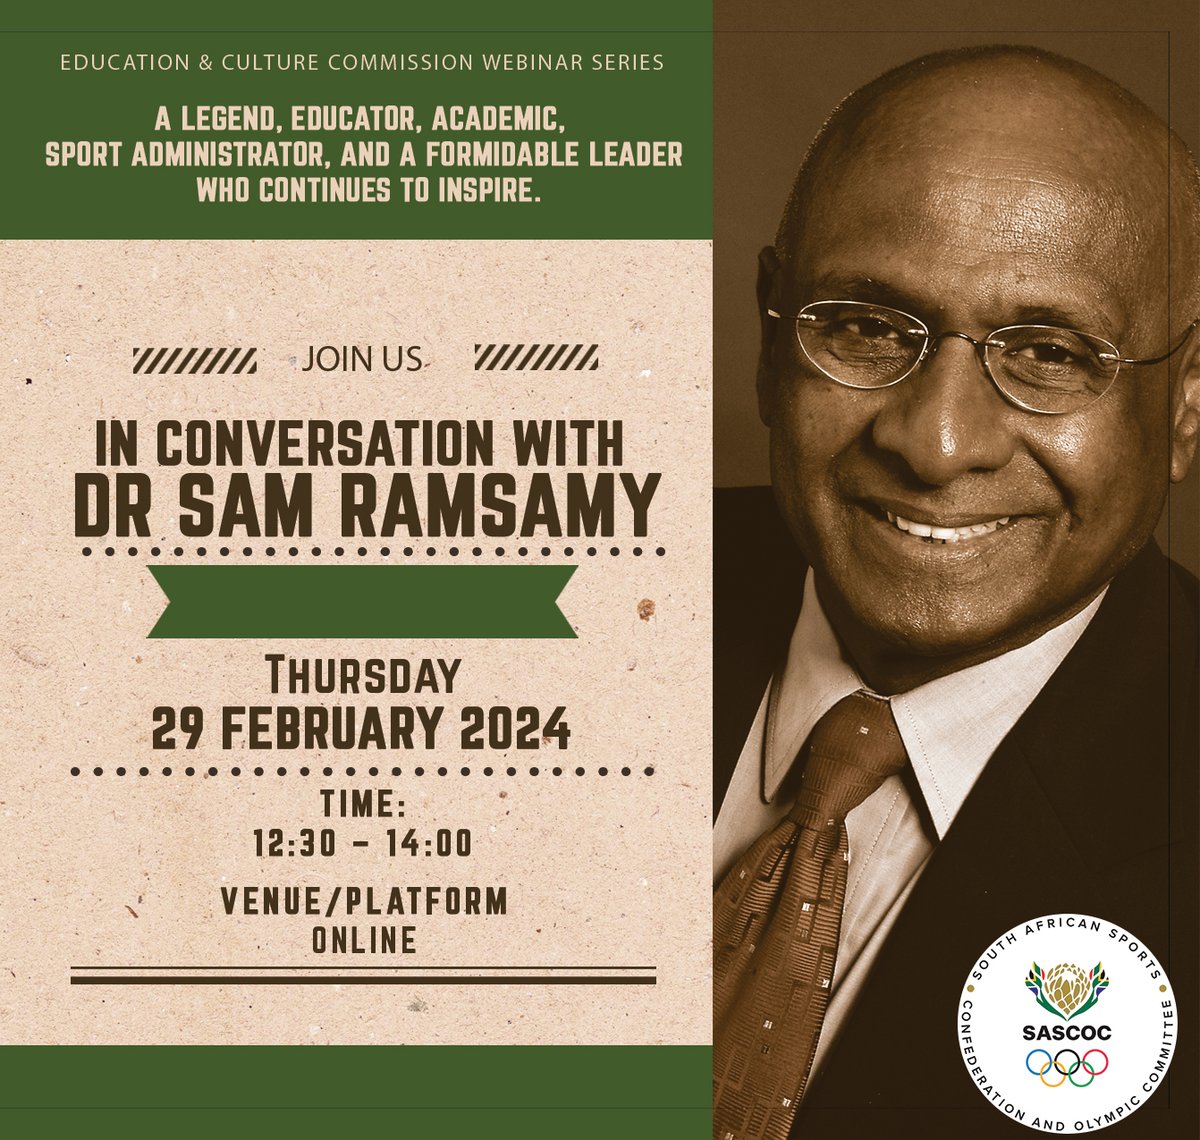 We are going 'In Conversation with Dr. Sam Ramsamy' This is an event not to be missed. Book your spot here: app.livestorm.co/sascoc-1/in-co…